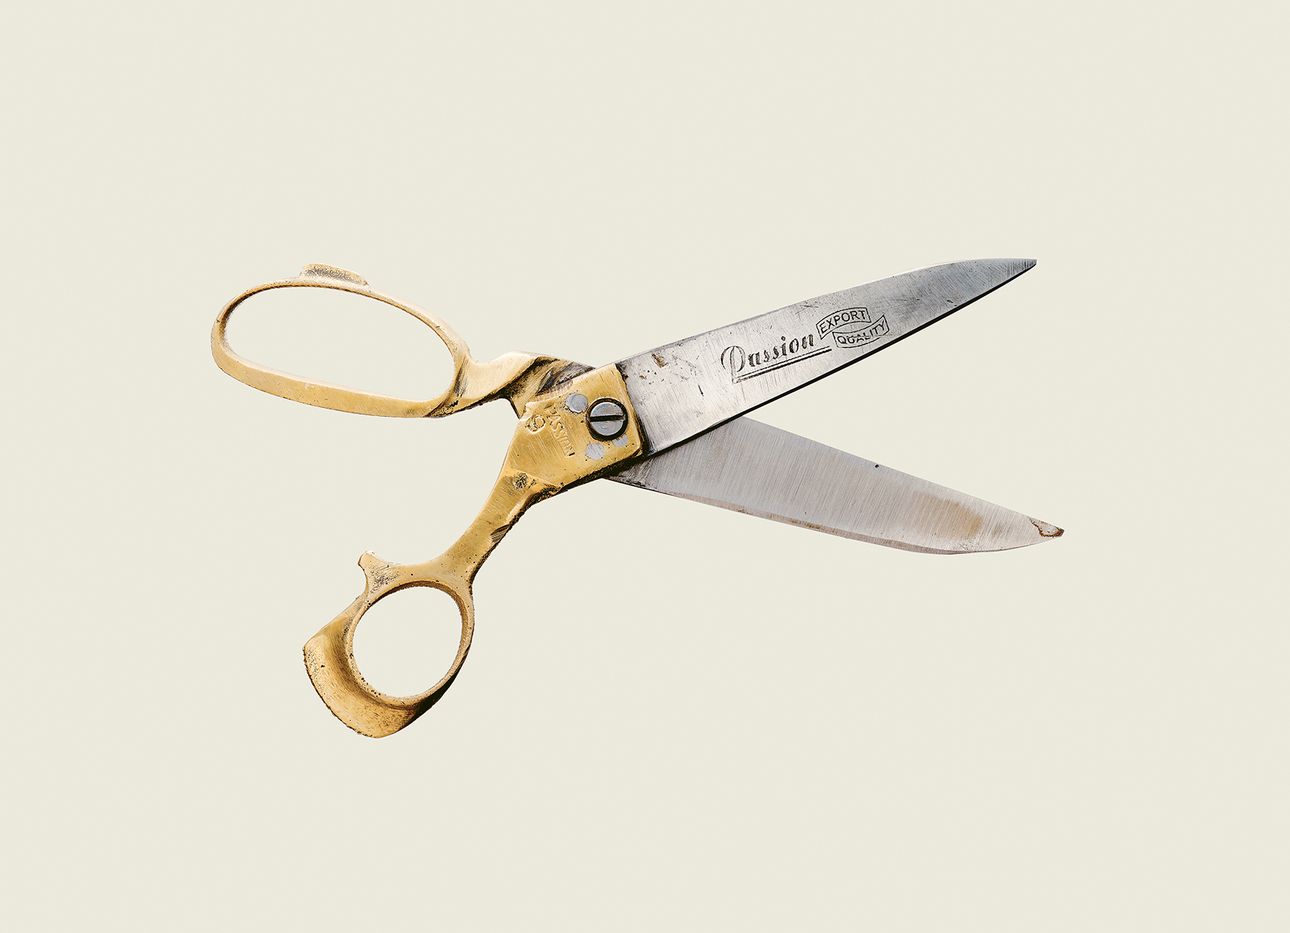 An old pair of scissors with a yellow handle.